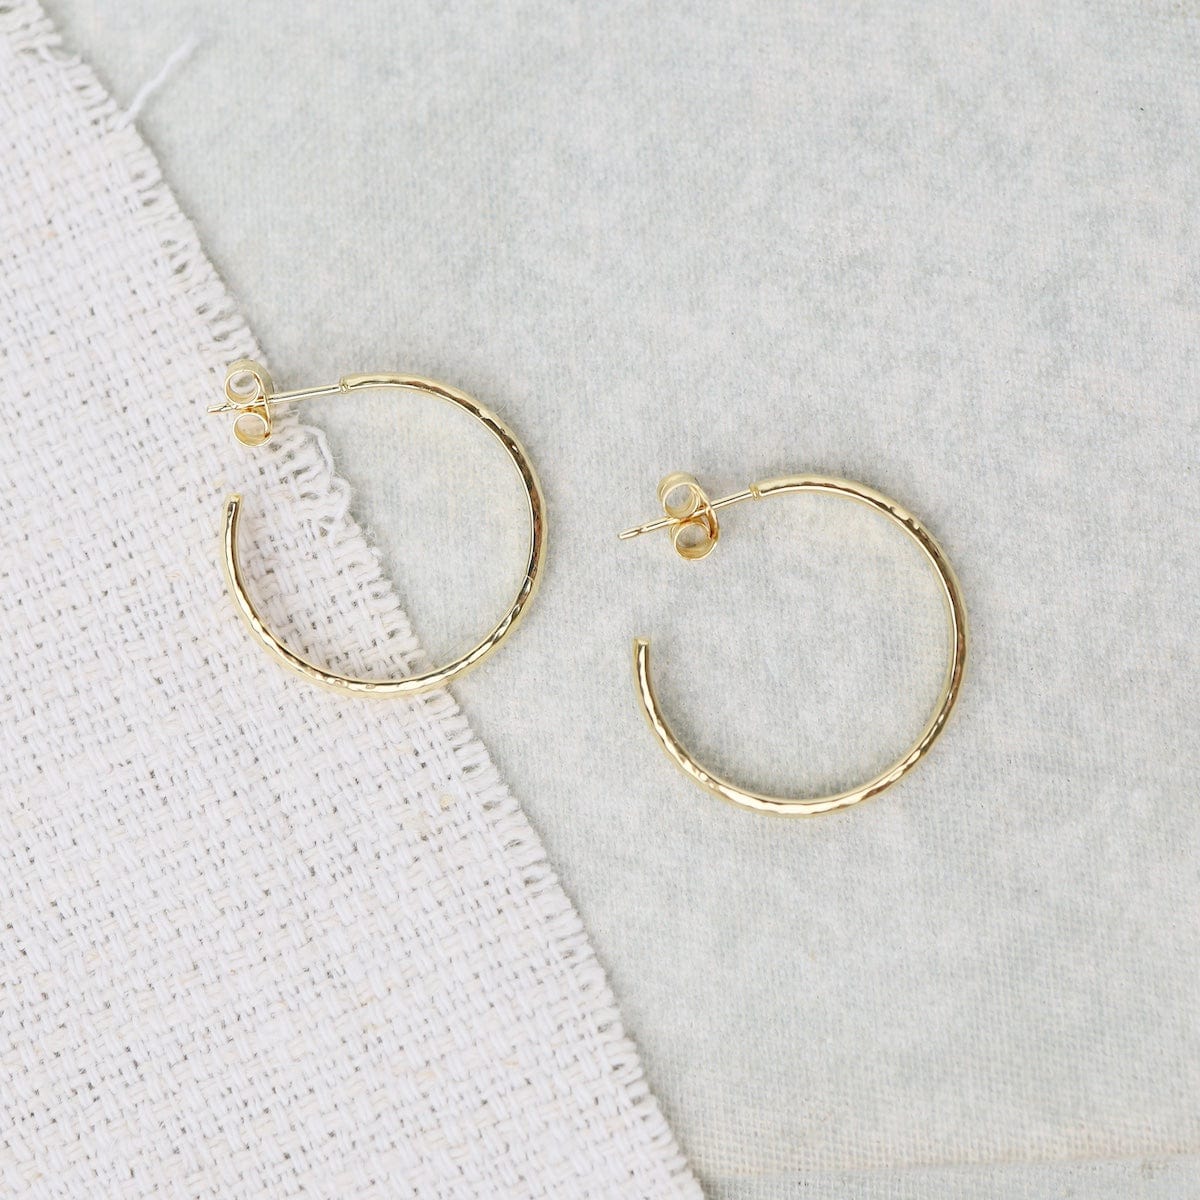 EAR-VRM 23mm Finely Hammered Hoops on Post - Gold Vermeil